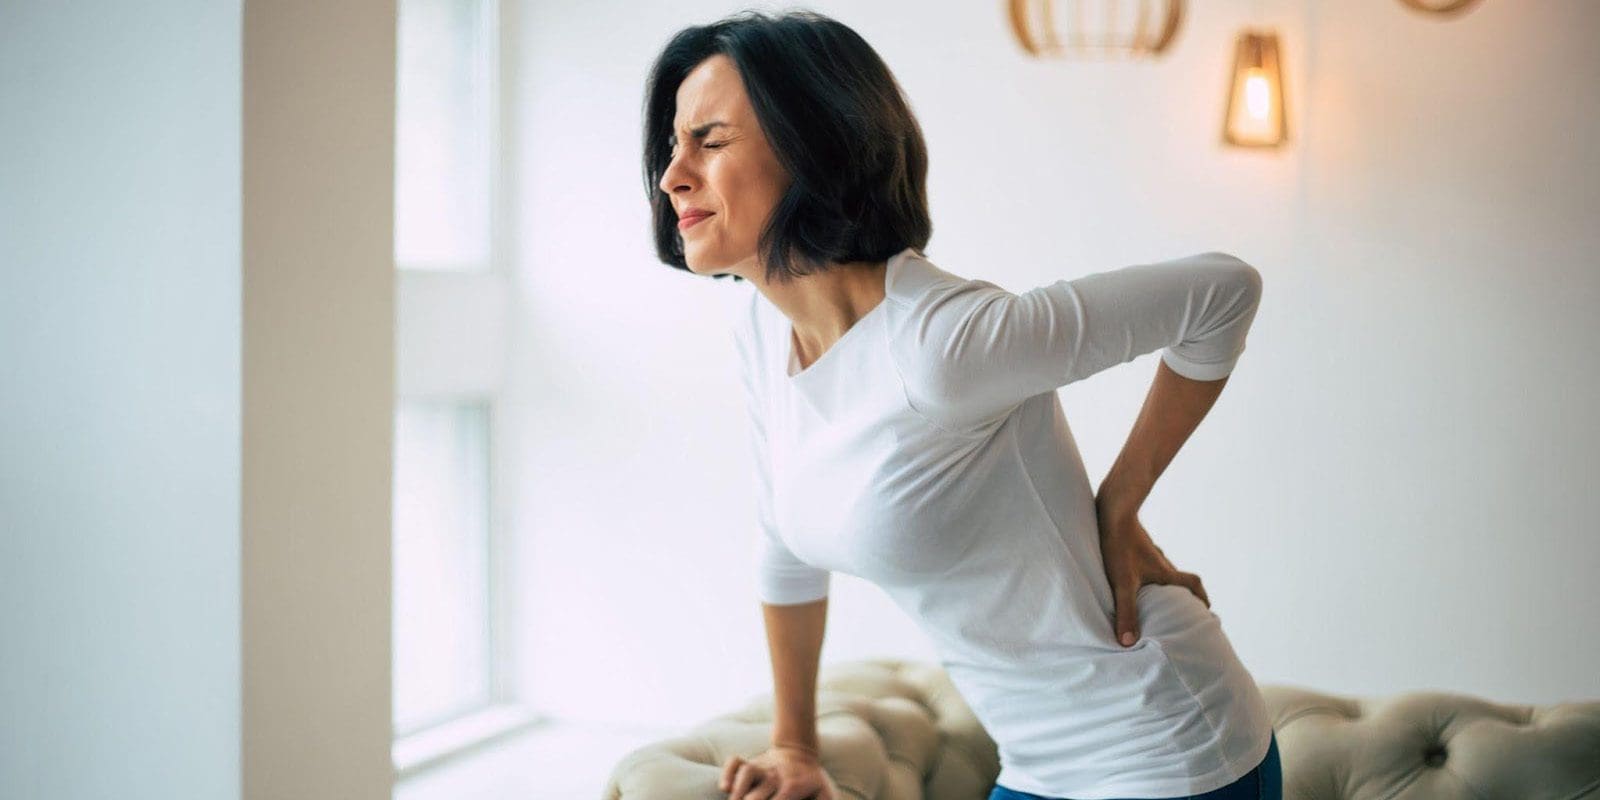 A woman suffering from Spondylolisthesis pain.